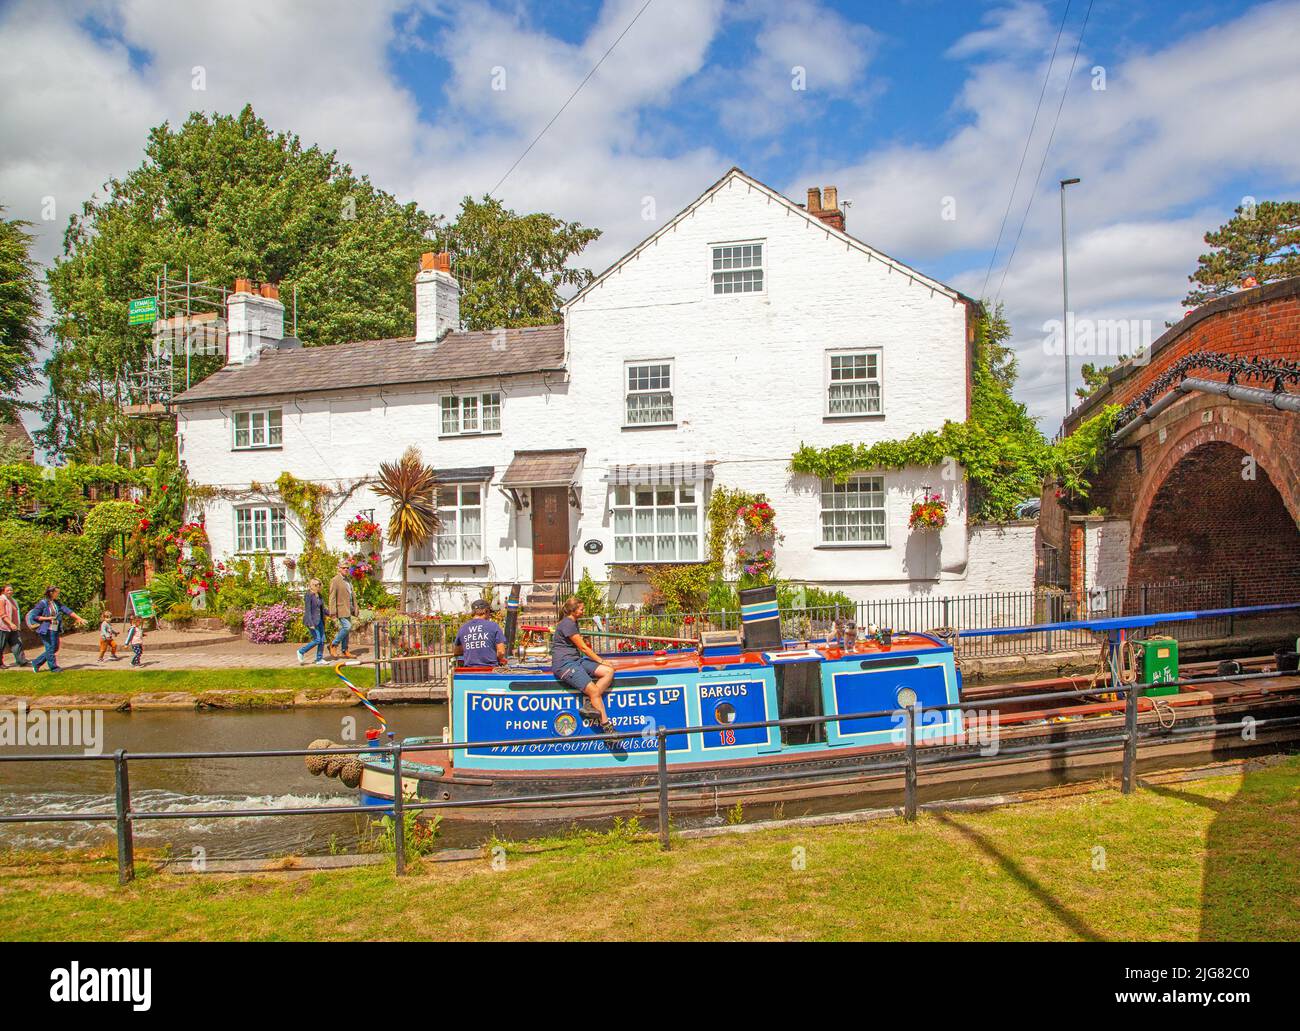 Canal narrowboat passing through the Cheshire village of Lymm on the Bridgewater canal Stock Photo